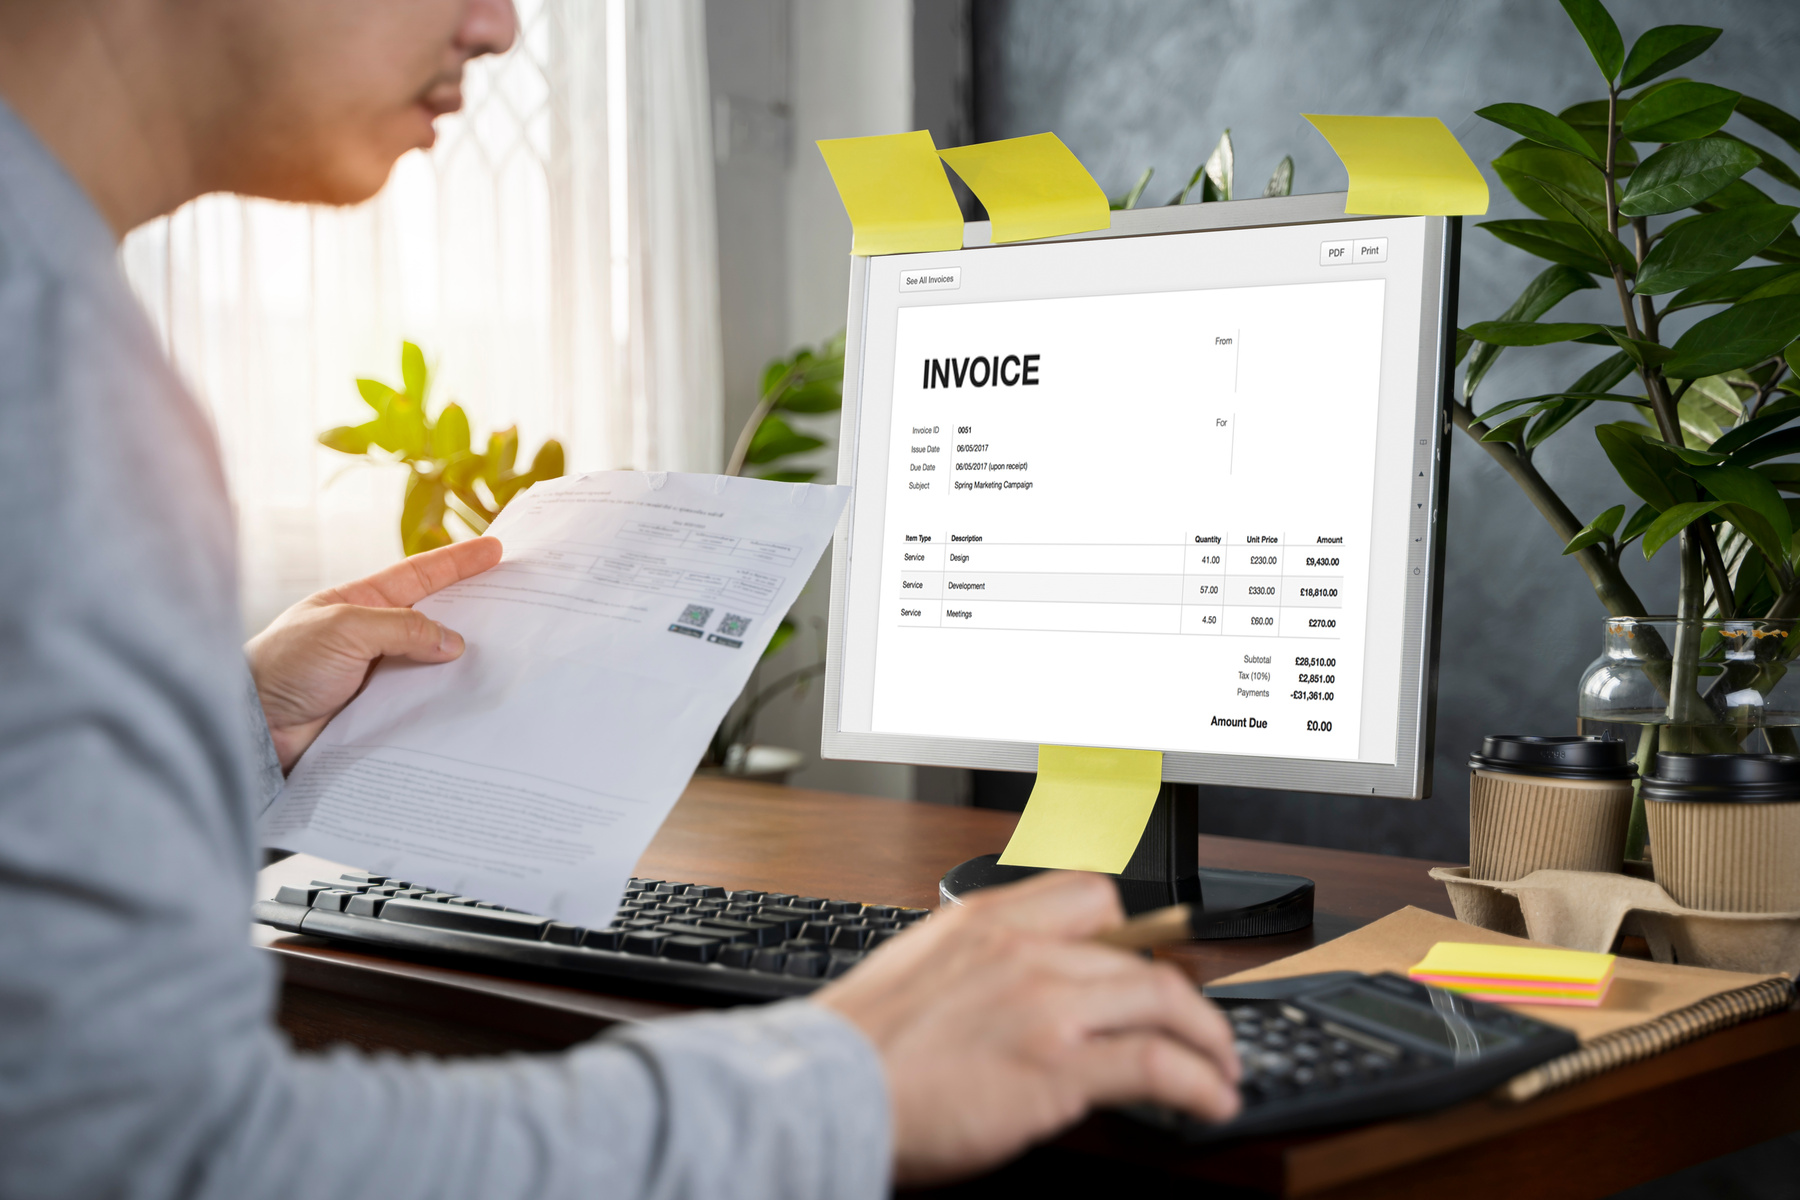 Online Digital Invoice And Tax Pay On Screen. Professional Accou